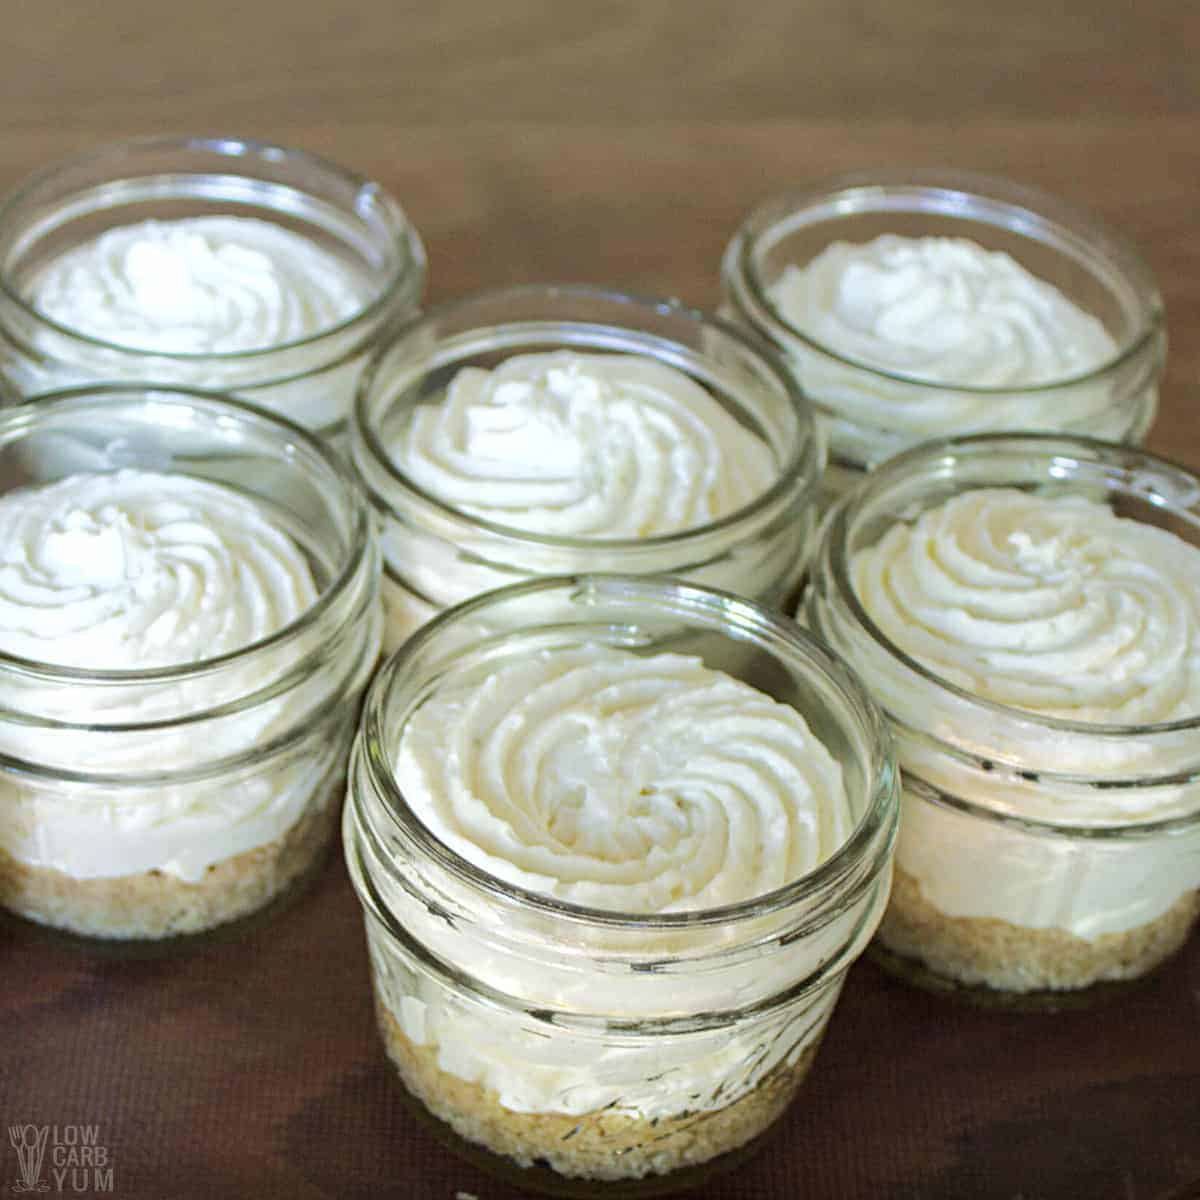 piped no-bake key lime cheesecake filling in jars.